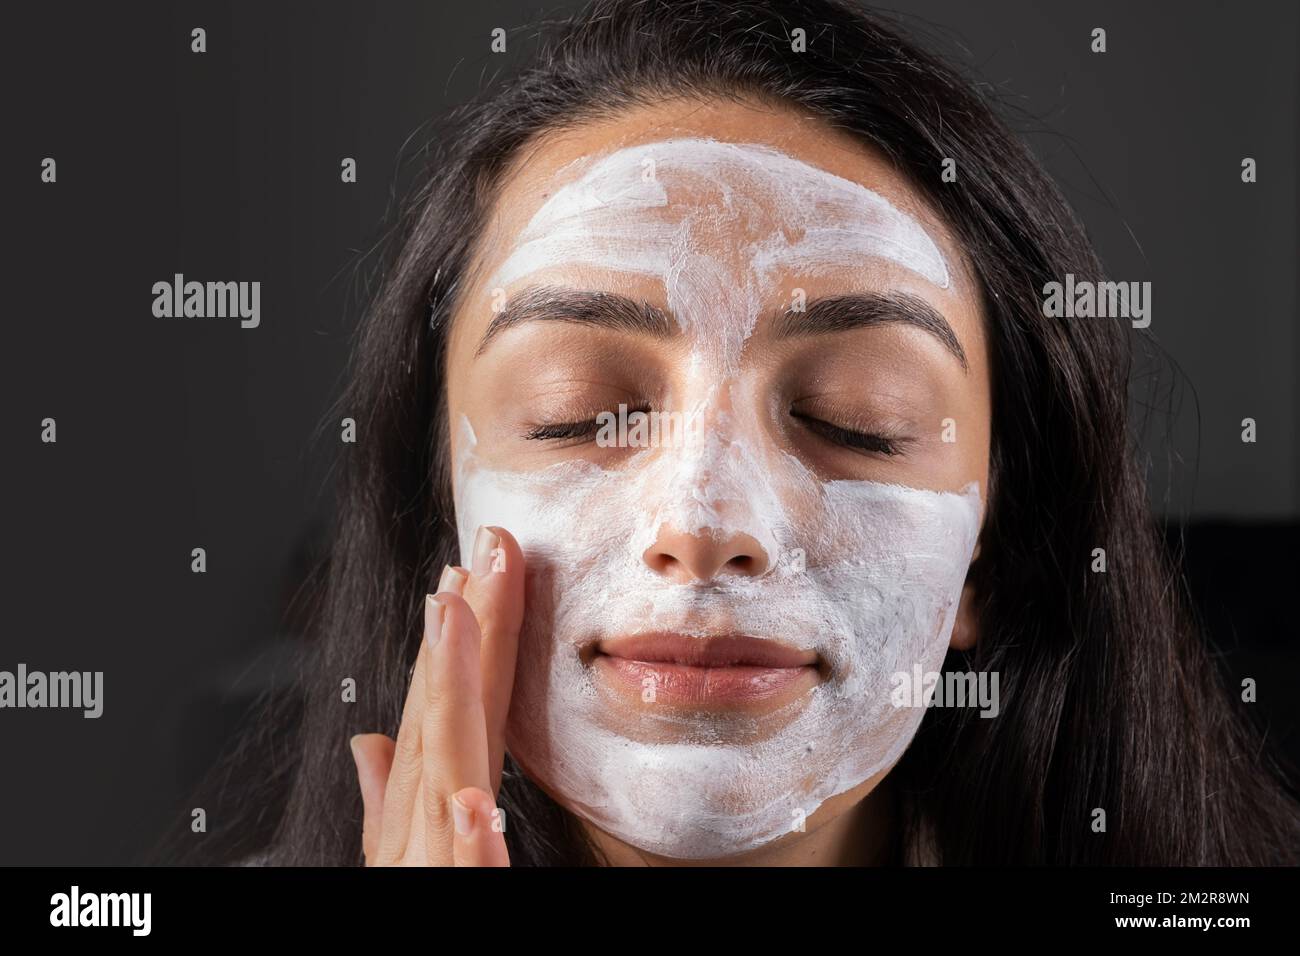 Closed up eyes applying clay mask. Caucasian girl making spa at home, Beauty treatments concept idea image. Touching her cheek gently. skin care. Stock Photo